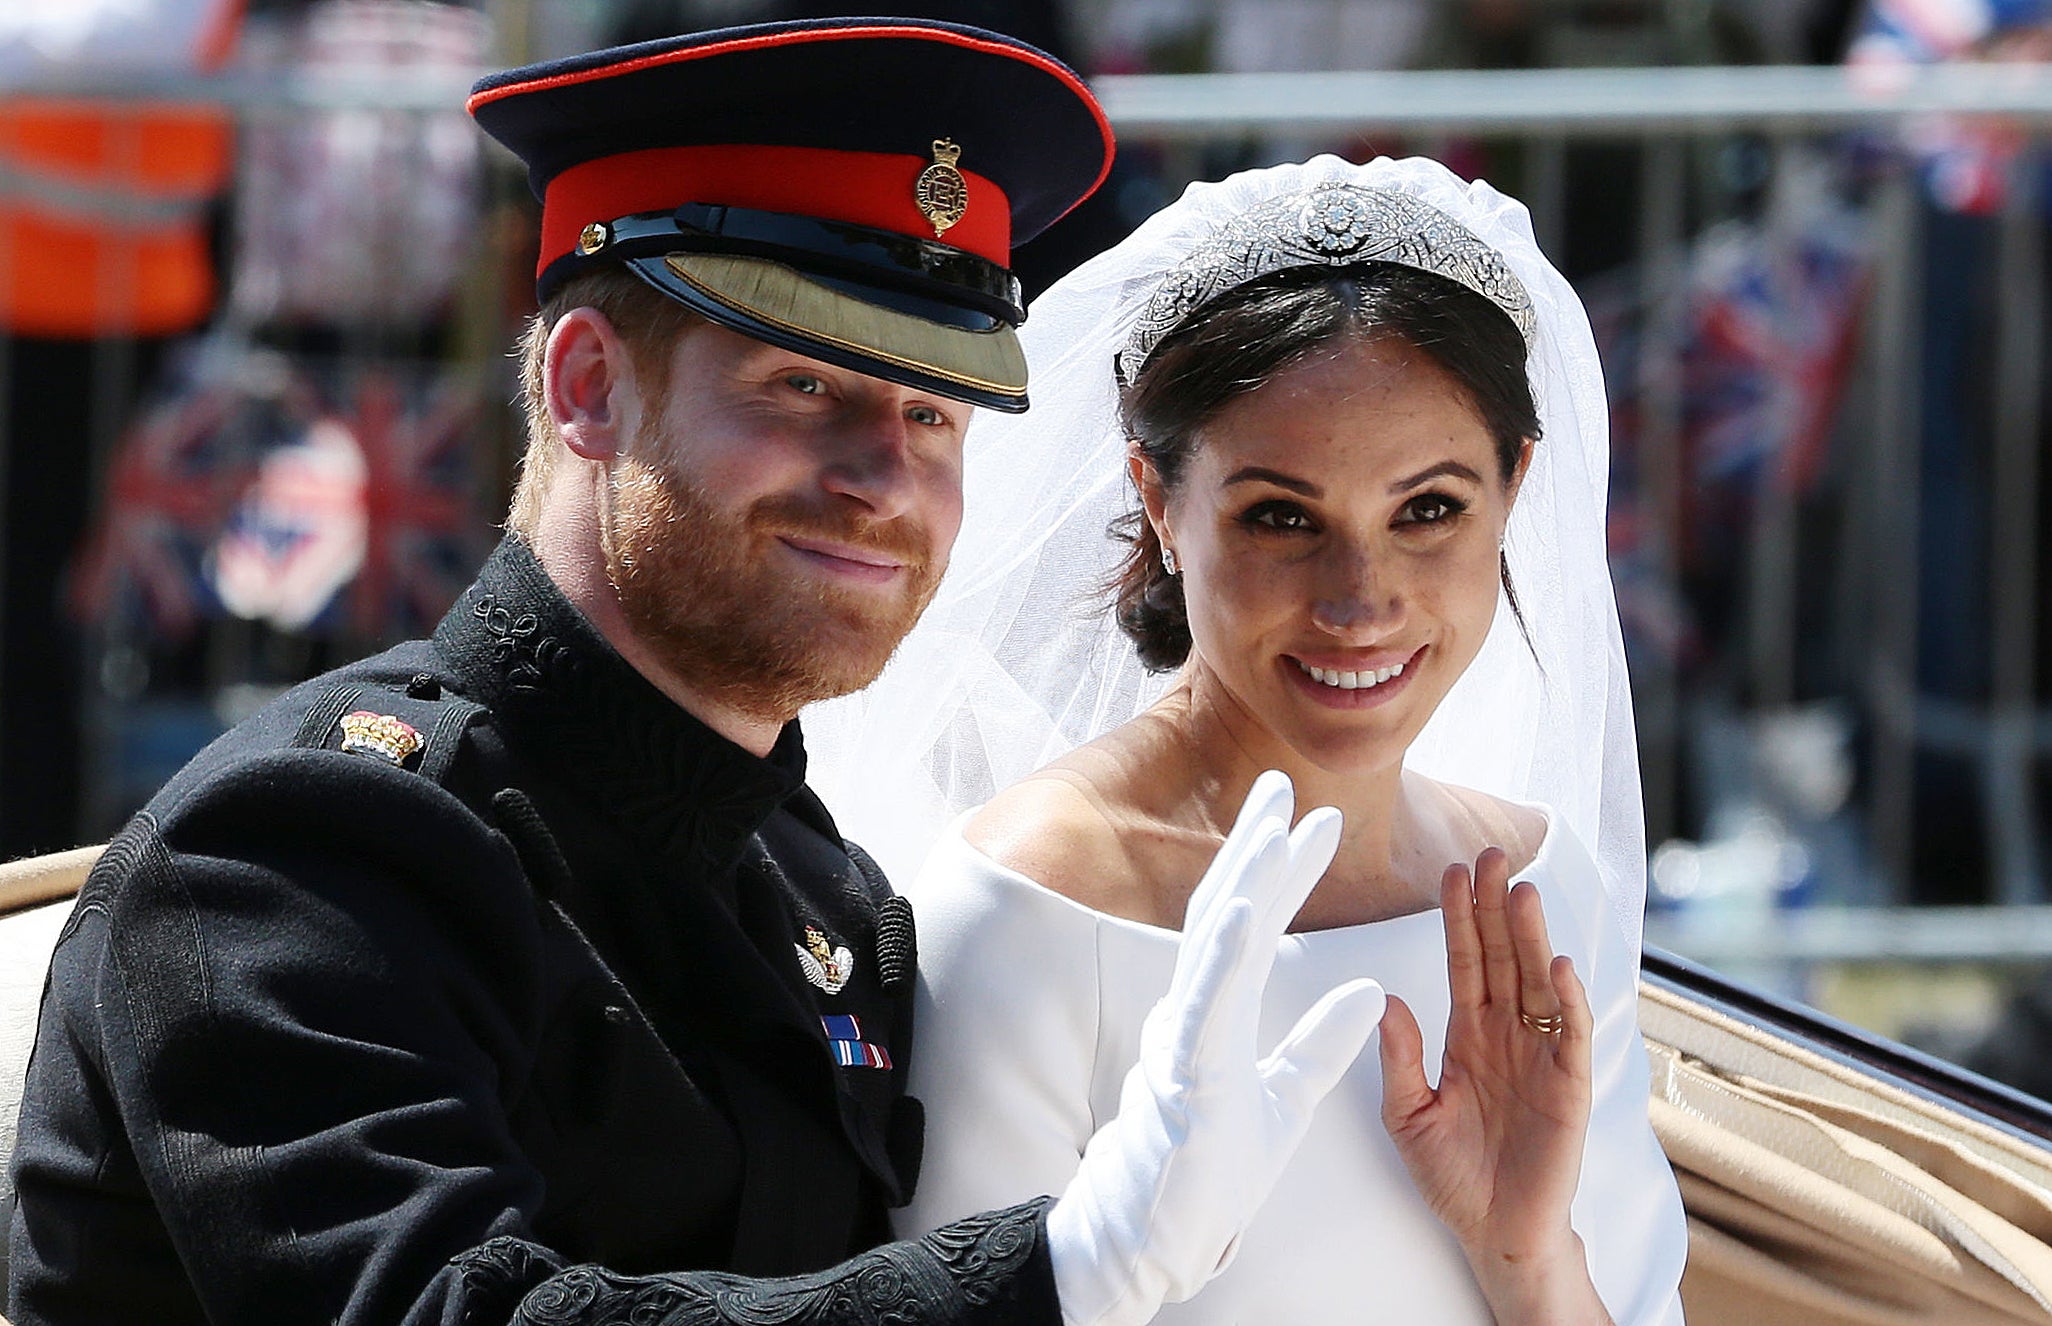 Prince Harry wears a beard on the day of his wedding to Meghan Markle